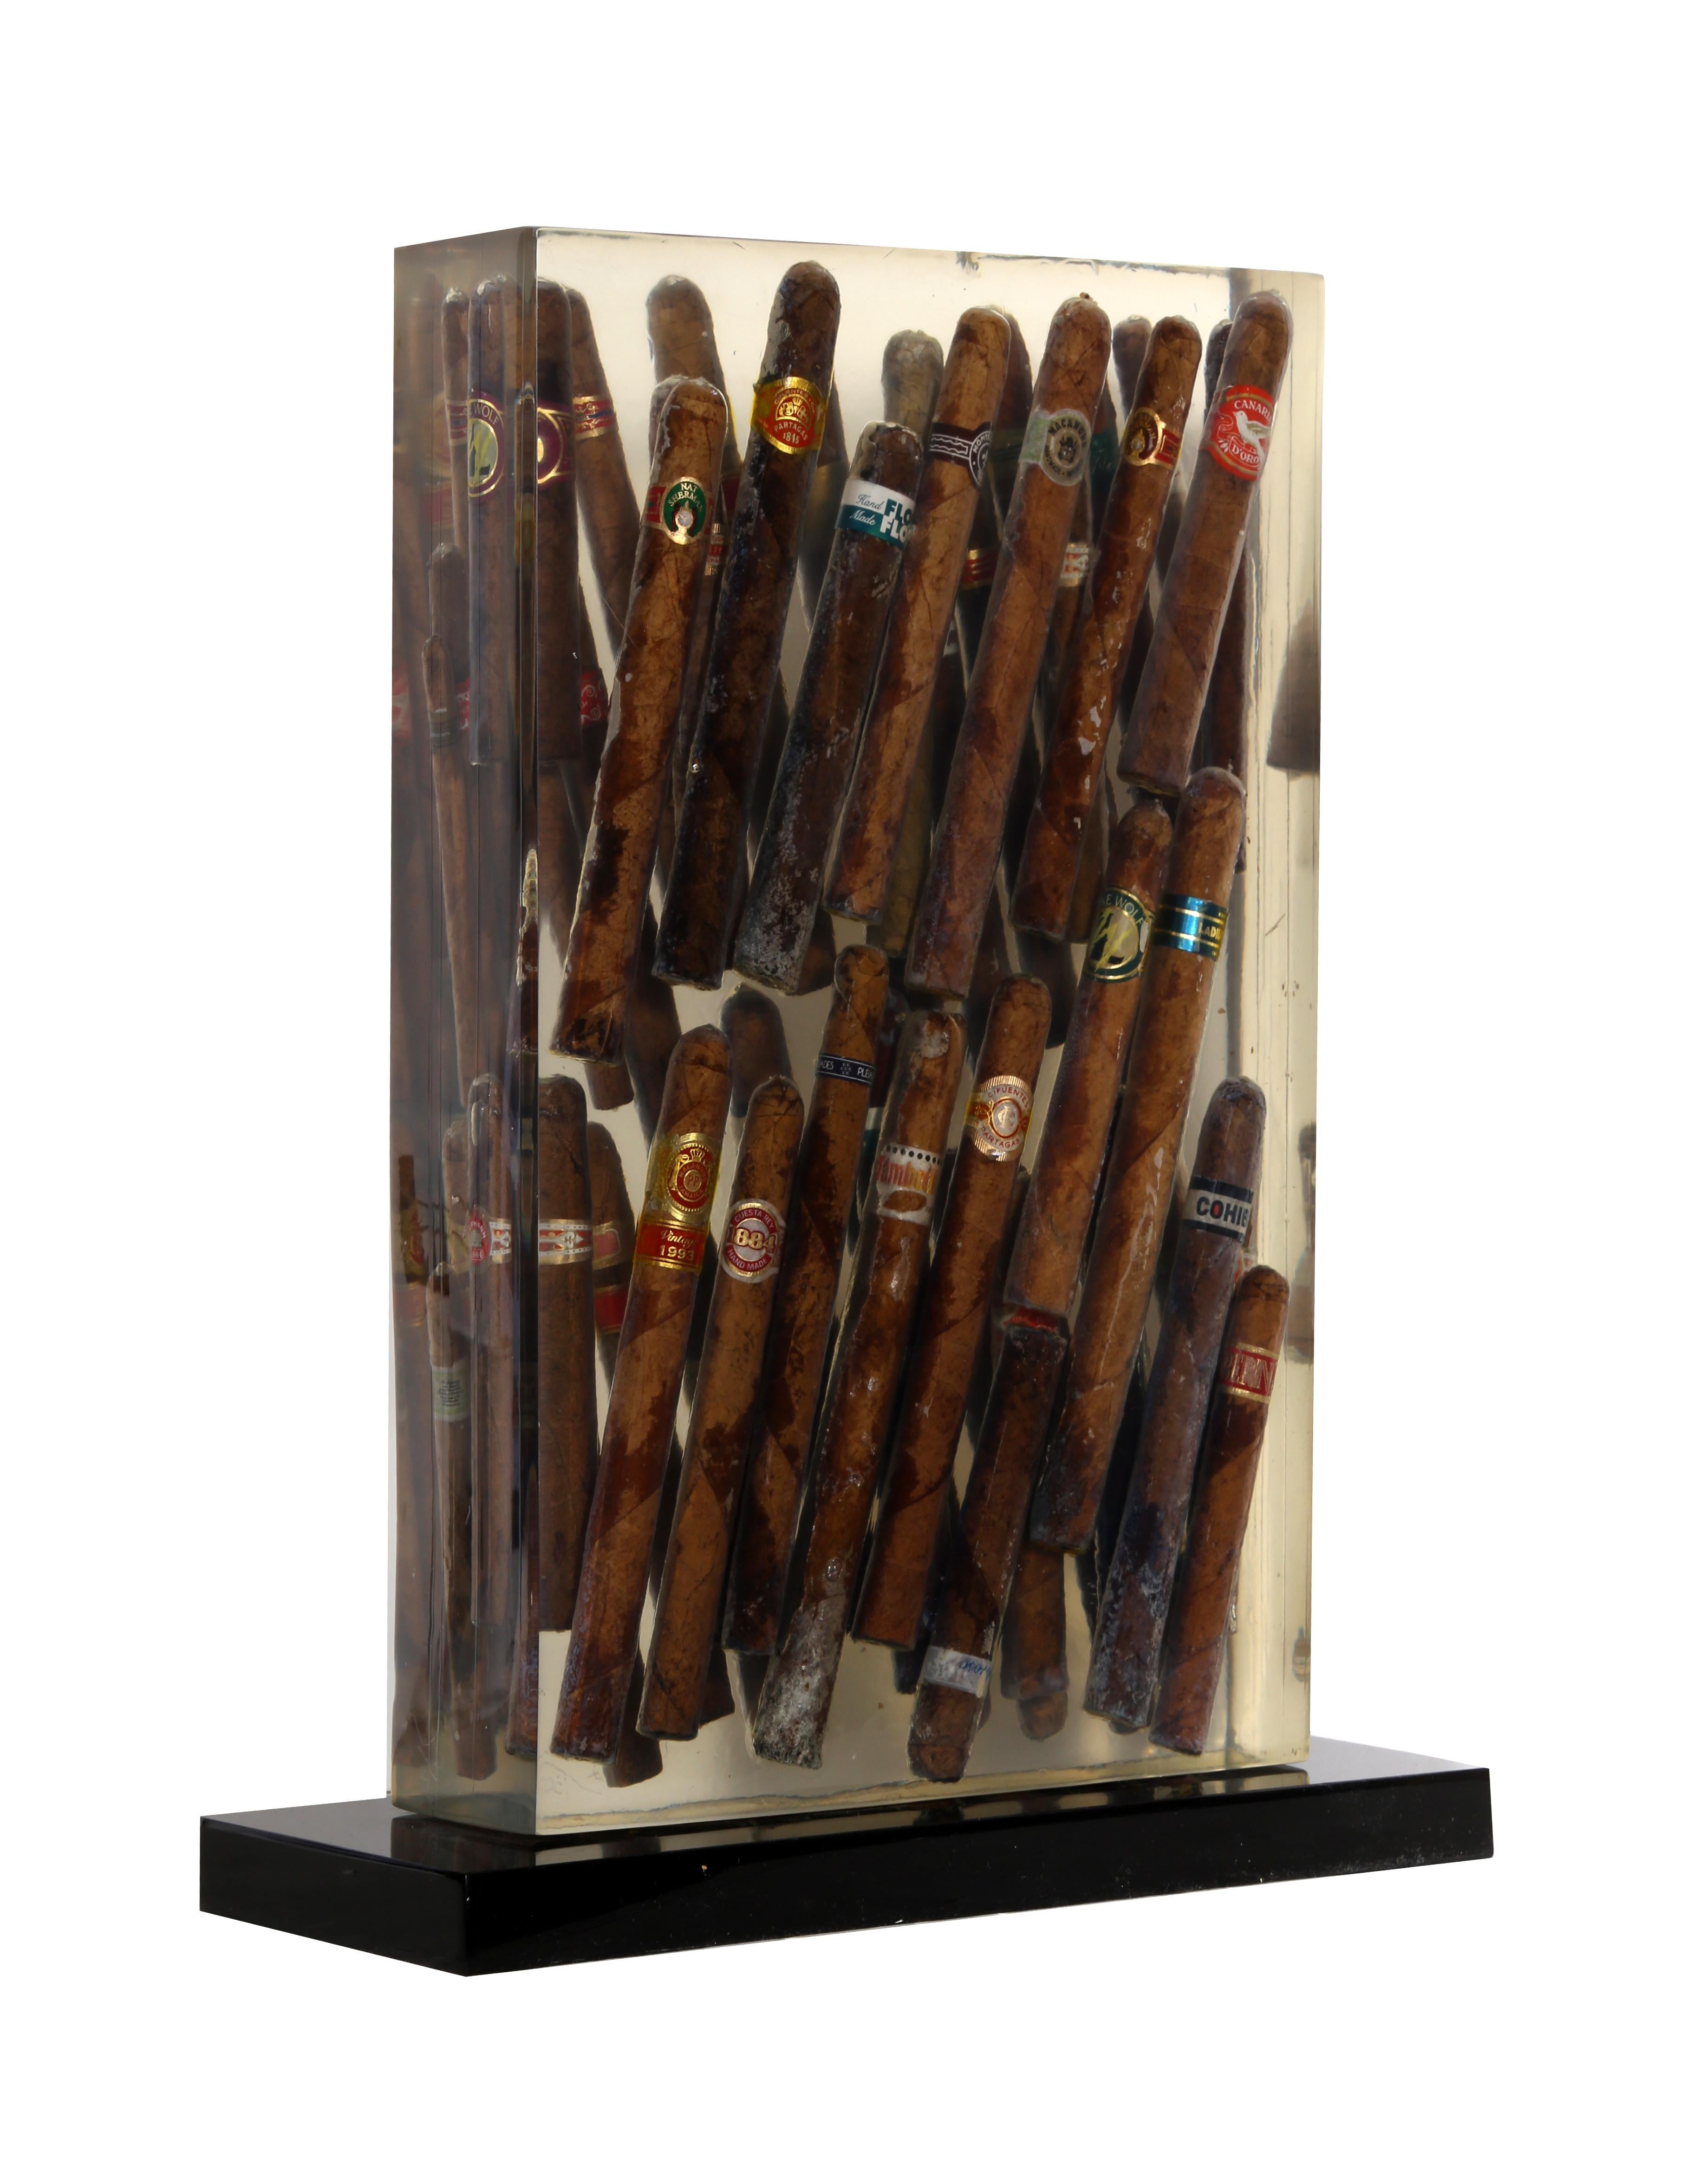 Fernandez Arman Abstract Sculpture - Waiting to Exhale, Accumulation Cigar Sculpture by Arman